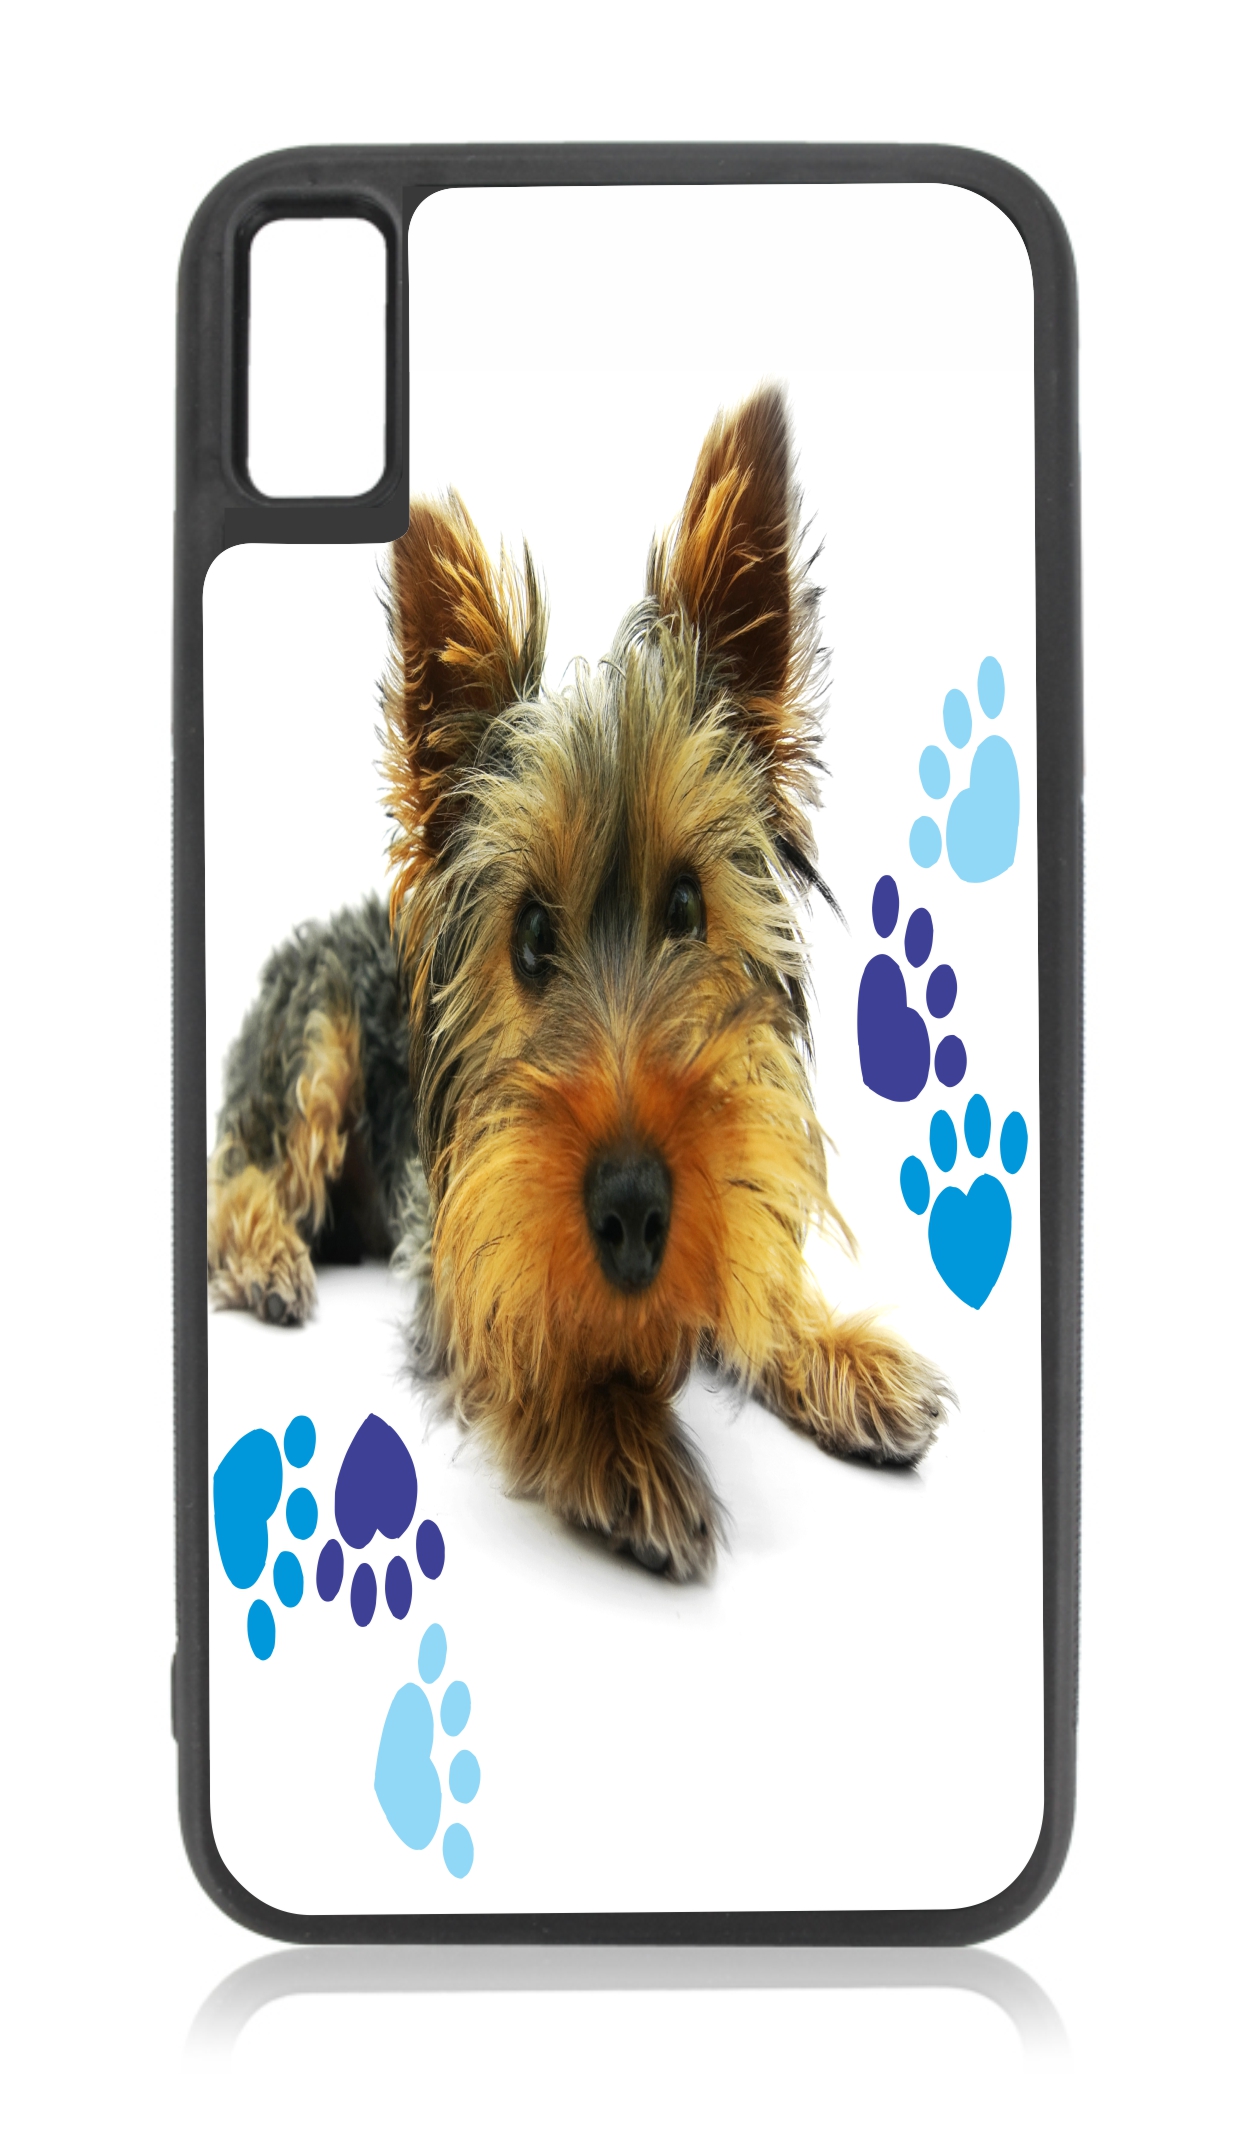 Yorkie Puppy Dog and Blue Pawprint Hearts iPhone 10 xr Dog Case Black Rubber Case for iPhone XR - iPhone XR Phone Case - iPhone XR Accessories - image 1 of 1